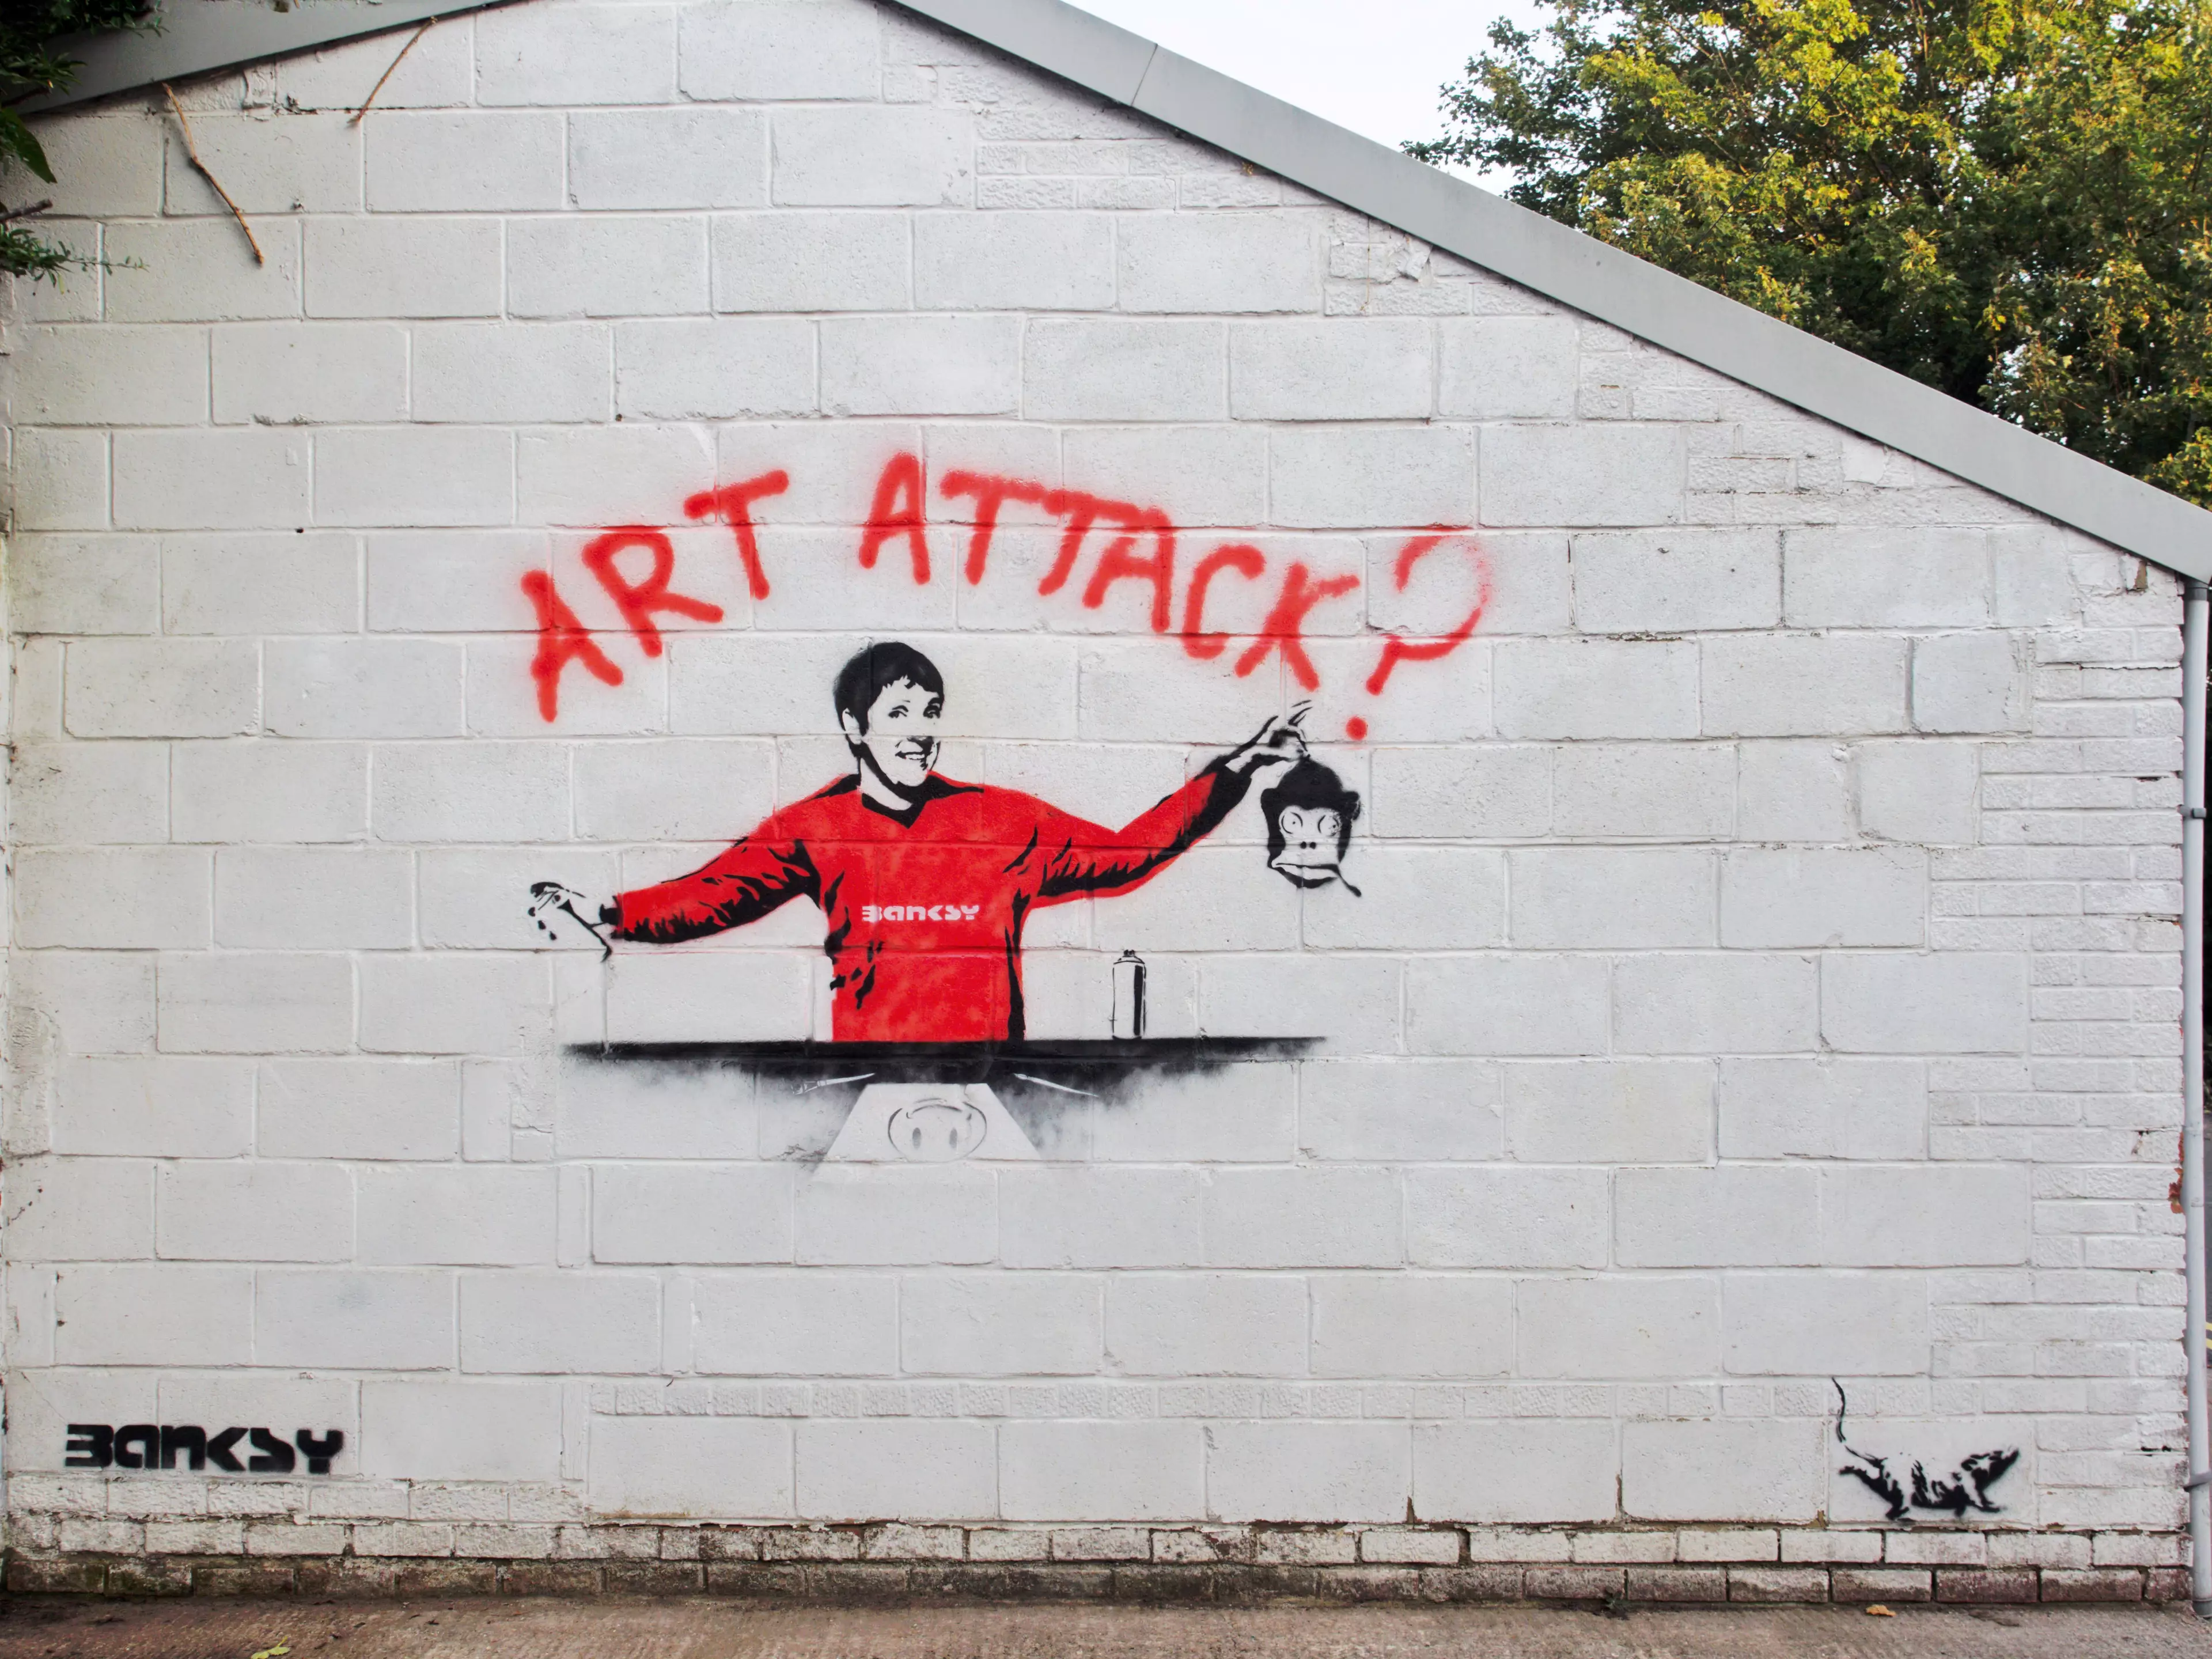 Could this be a Banksy?